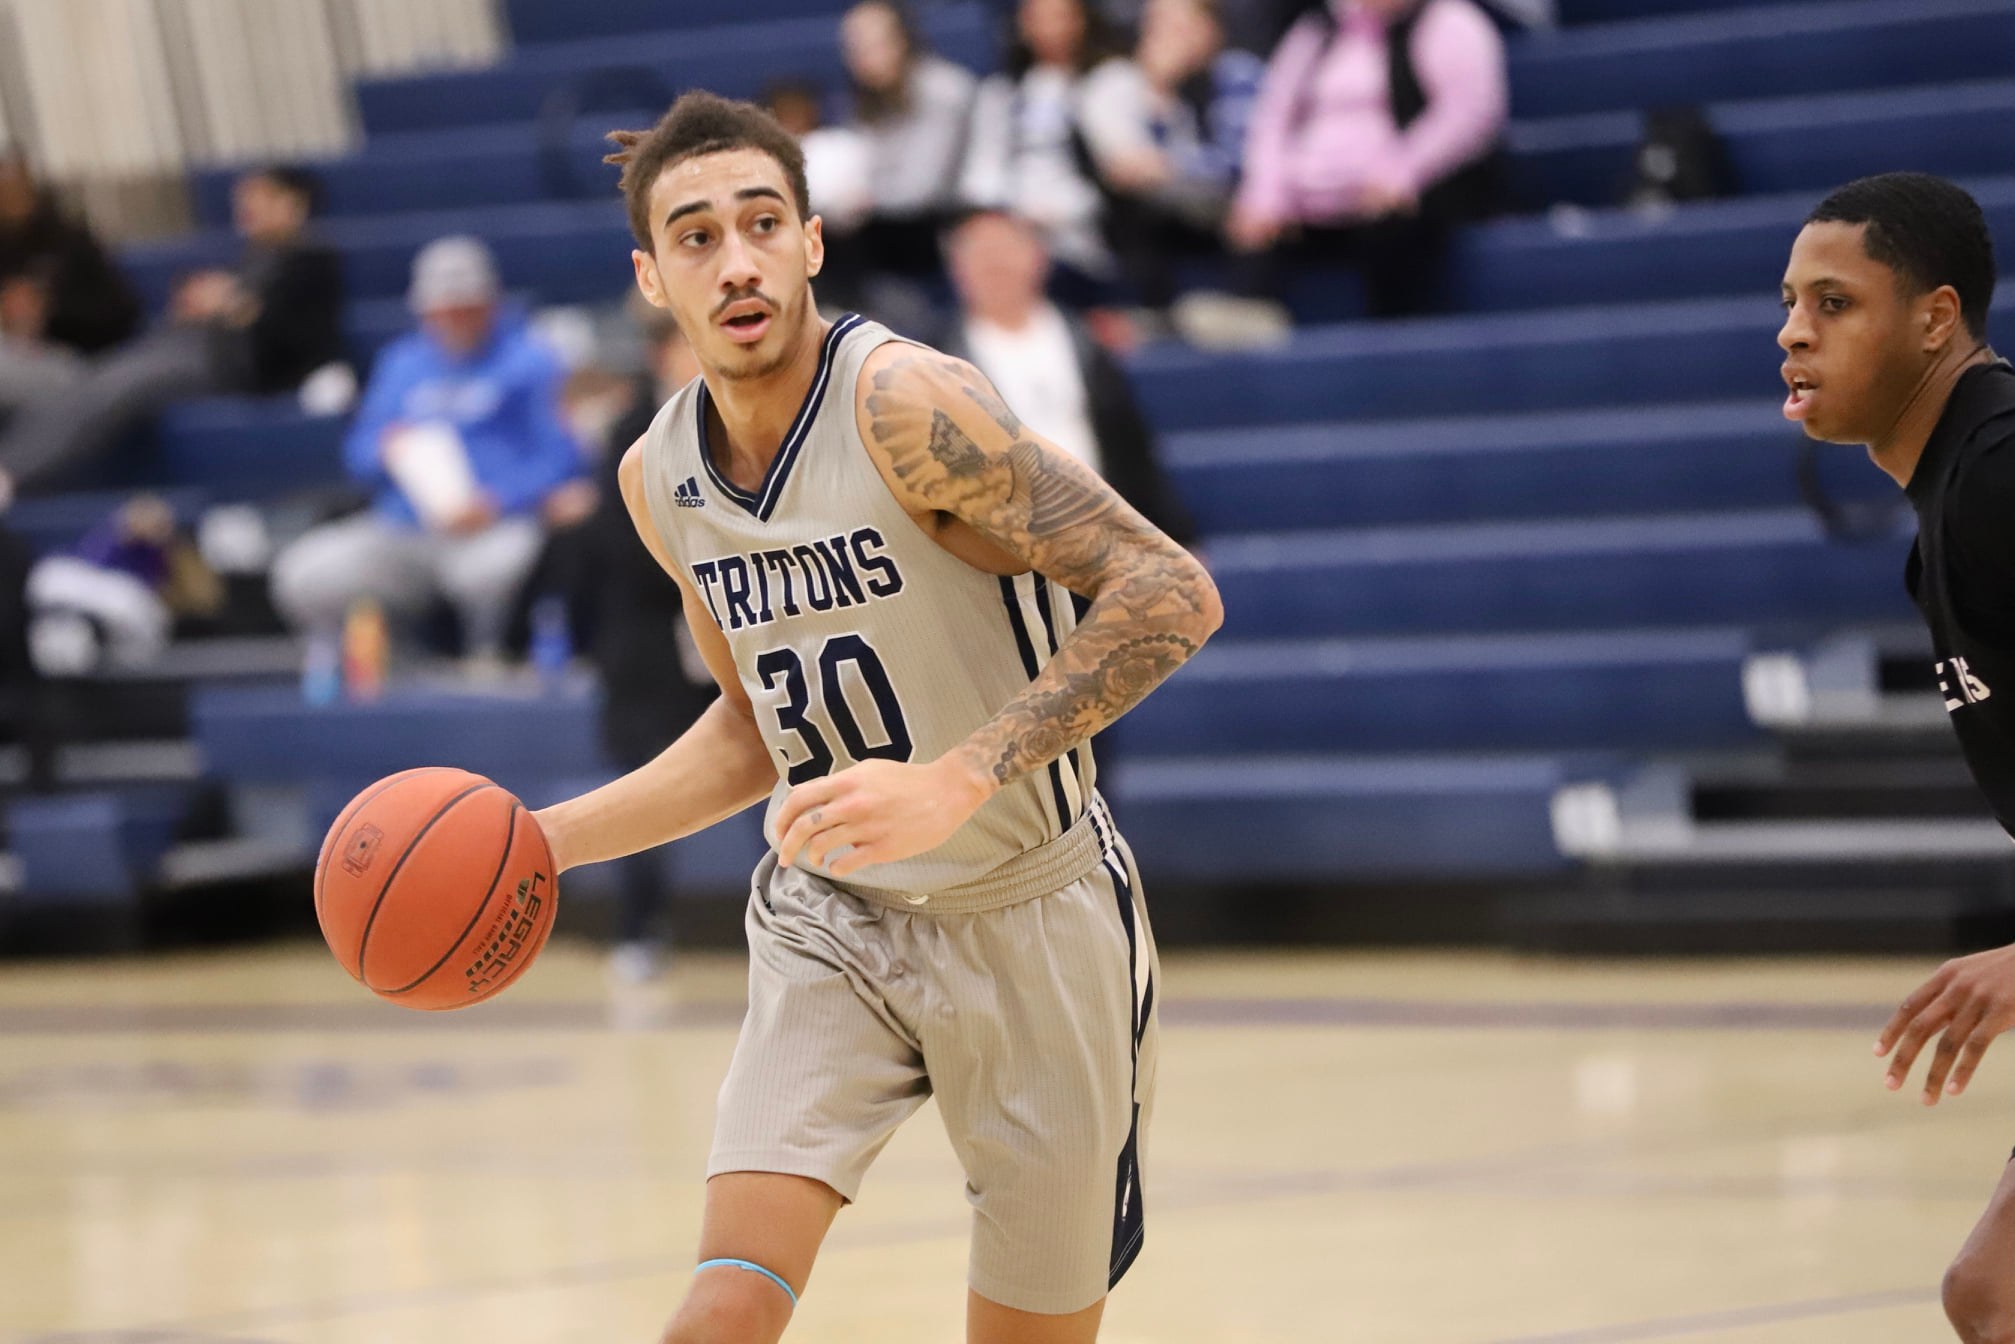 Keck, Taylor, Baker with double-doubles for Tritons